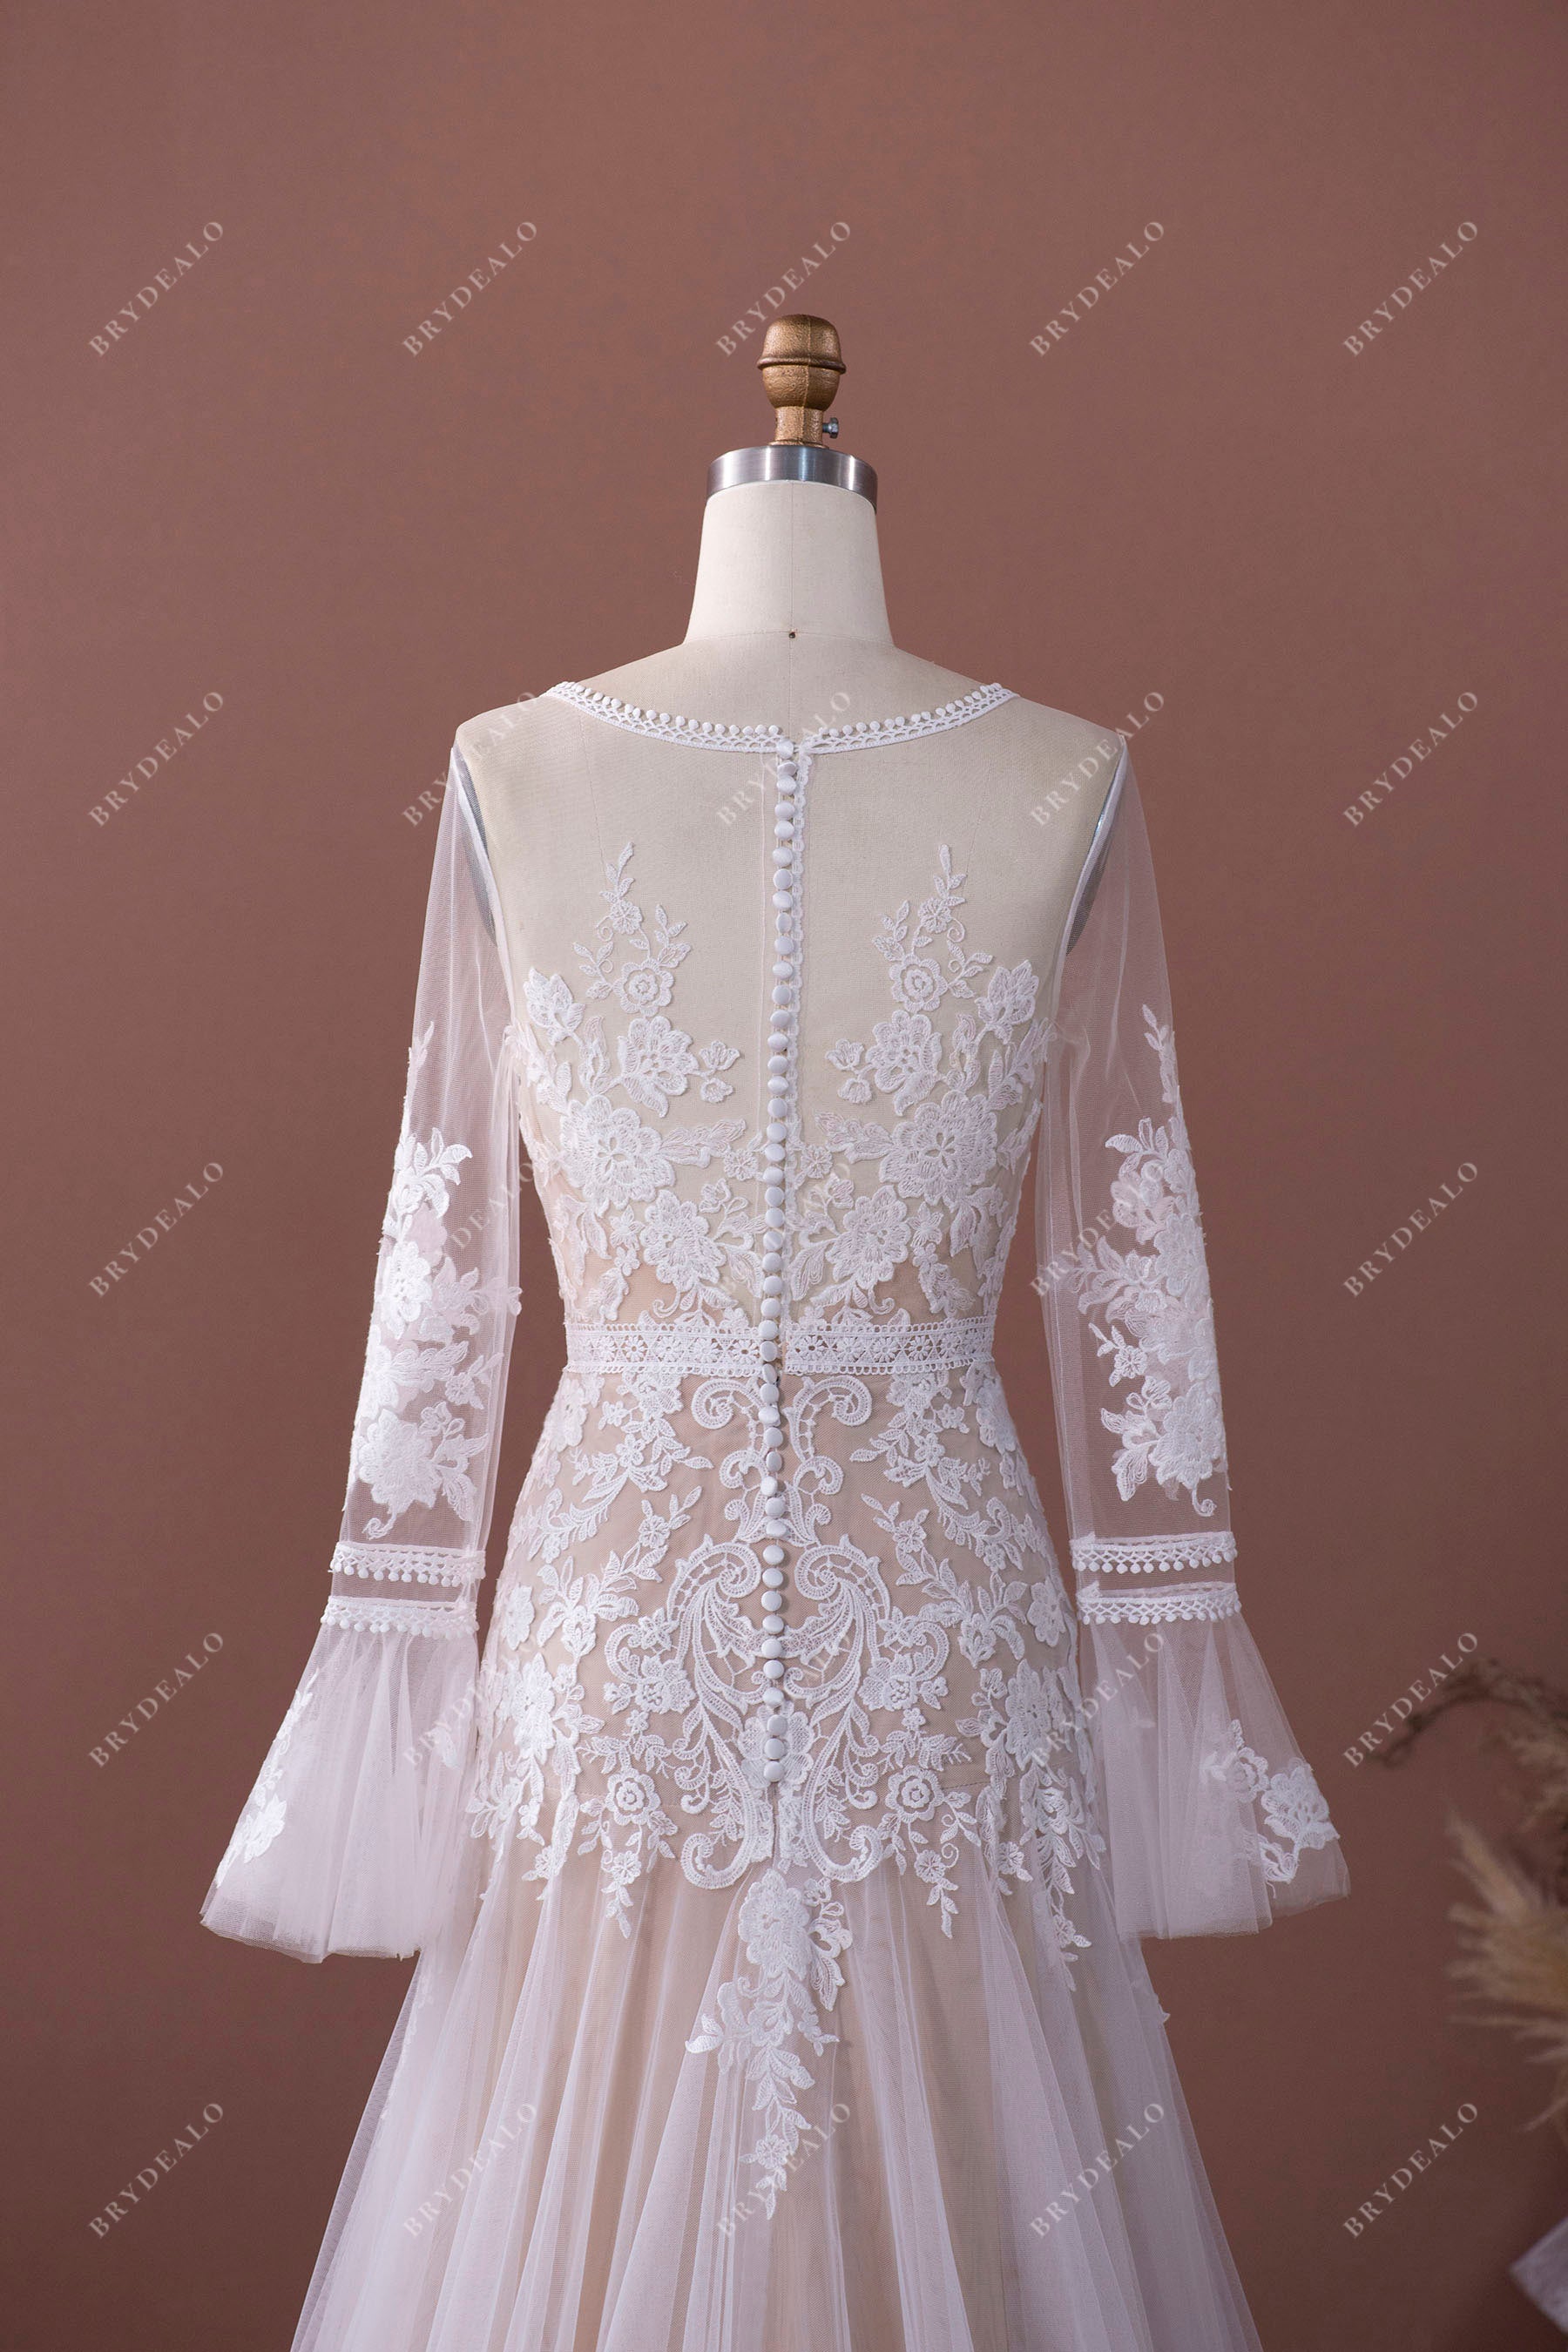 Private Label Romantic Bell Sleeve Boho Lace Wedding Dress